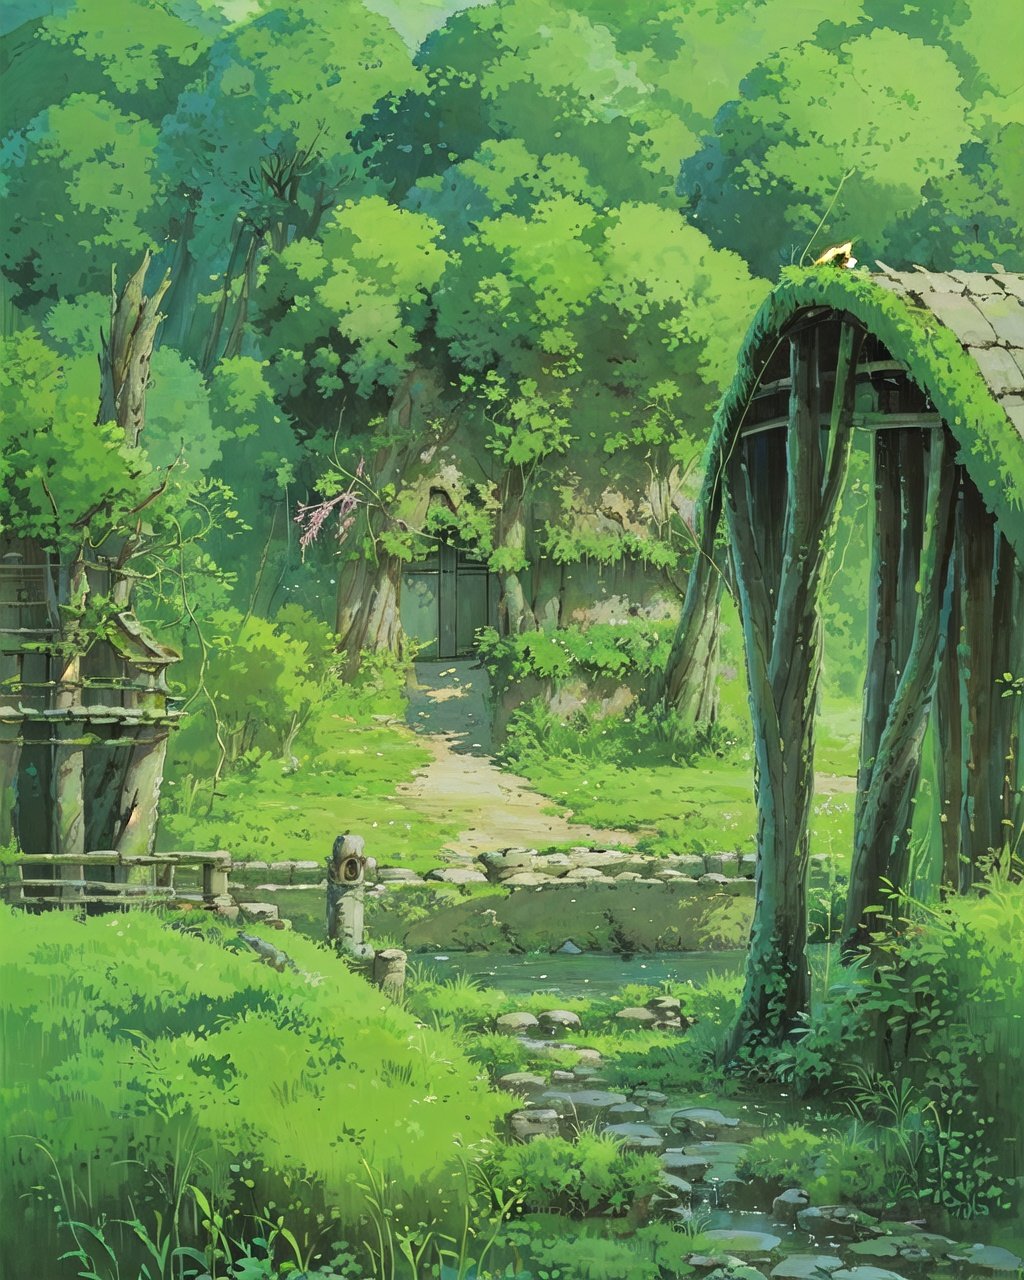 (((best quality))),architecture, bridge, building, bush, city, day, east_asian_architecture, forest, grass, nature, outdoors, overgrown, plant, ruins, scenery, treeweapon,concept art,high detail,distinct,Spirited Away,game,vivid,level design